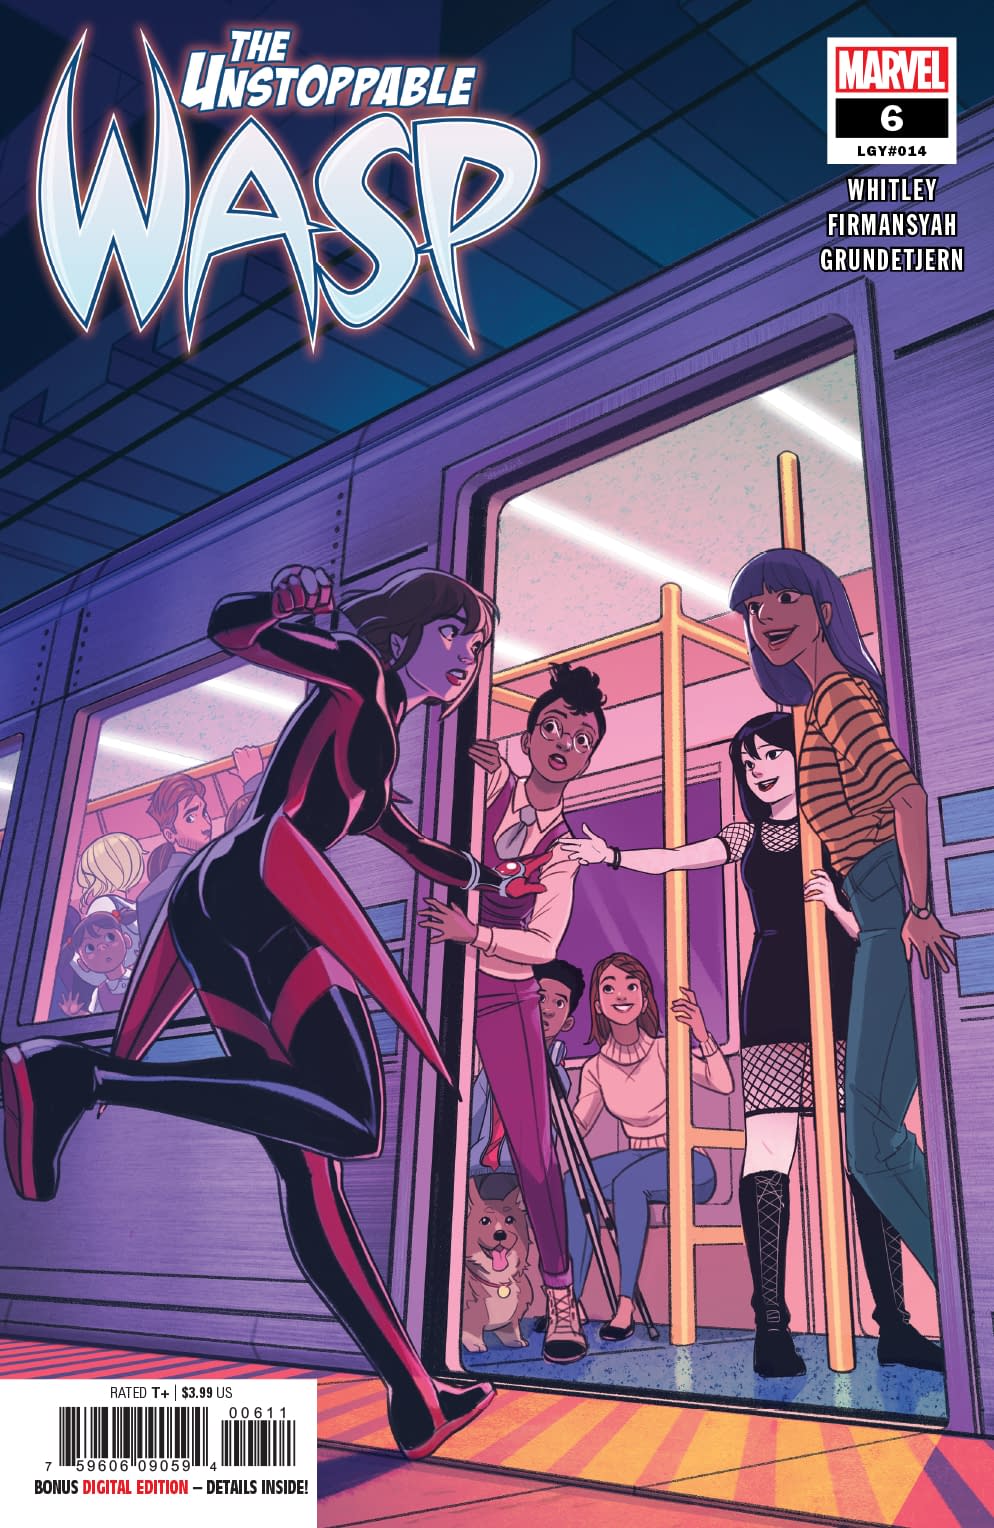 Where Nadia Can Stick Her Privileged, Ableist Apology in Next Week's Unstoppable Wasp #6